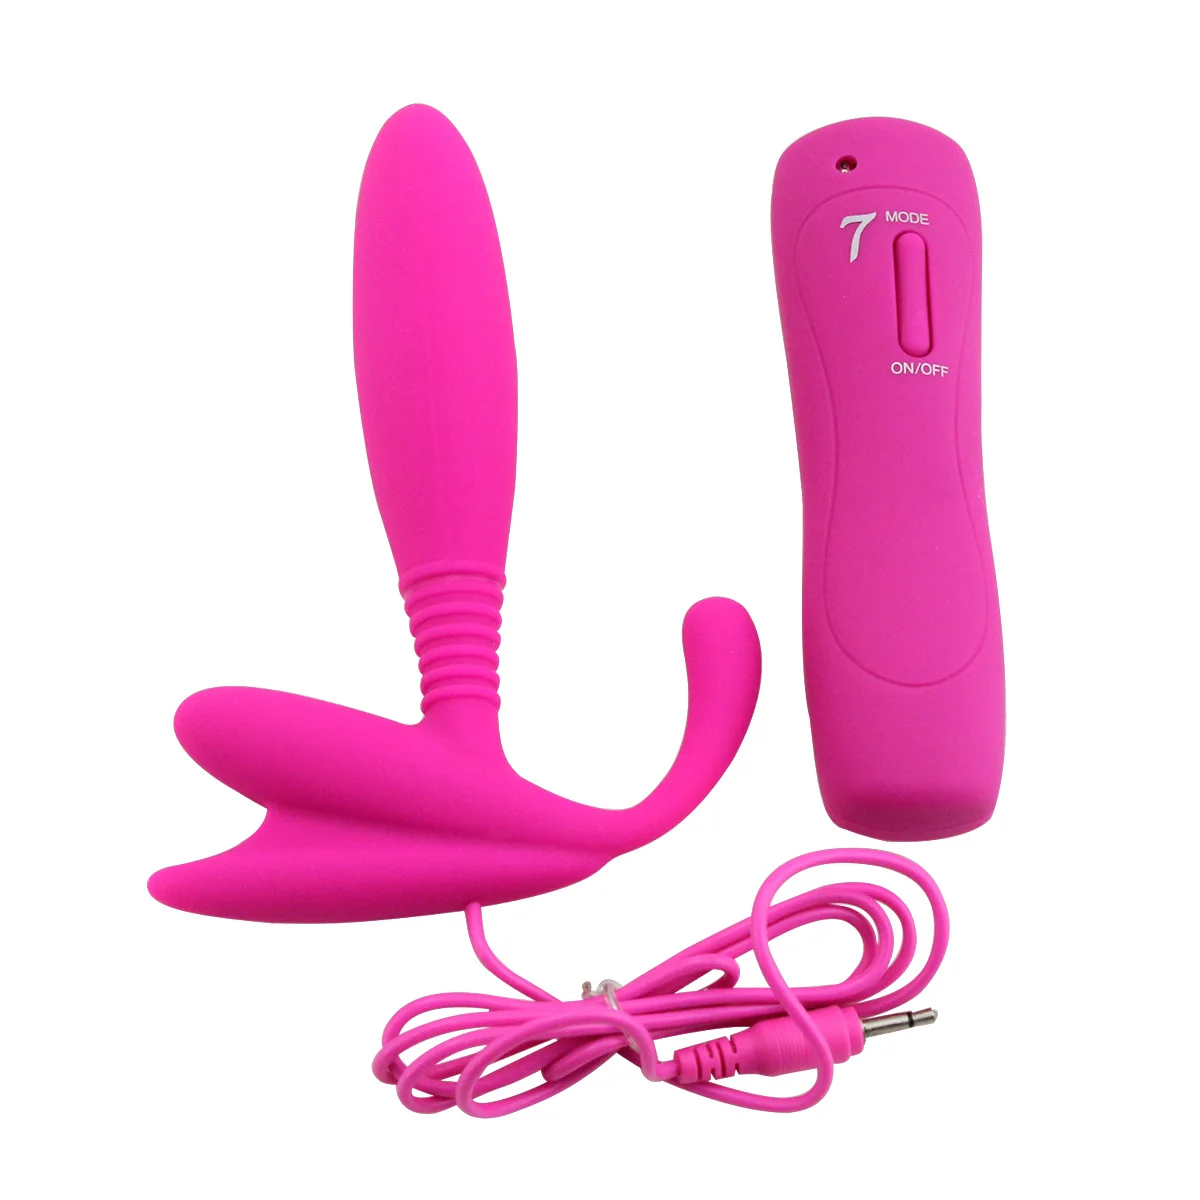 Anal Toying Sex - 7 Mode Anal Sex Toys For Men Anal Porn Toys Sex Toys Anal Electric - Buy Sex  Toys Anal Electric,Anal Porn Toys,Sex Toys Anal Electric Product on  Alibaba.com